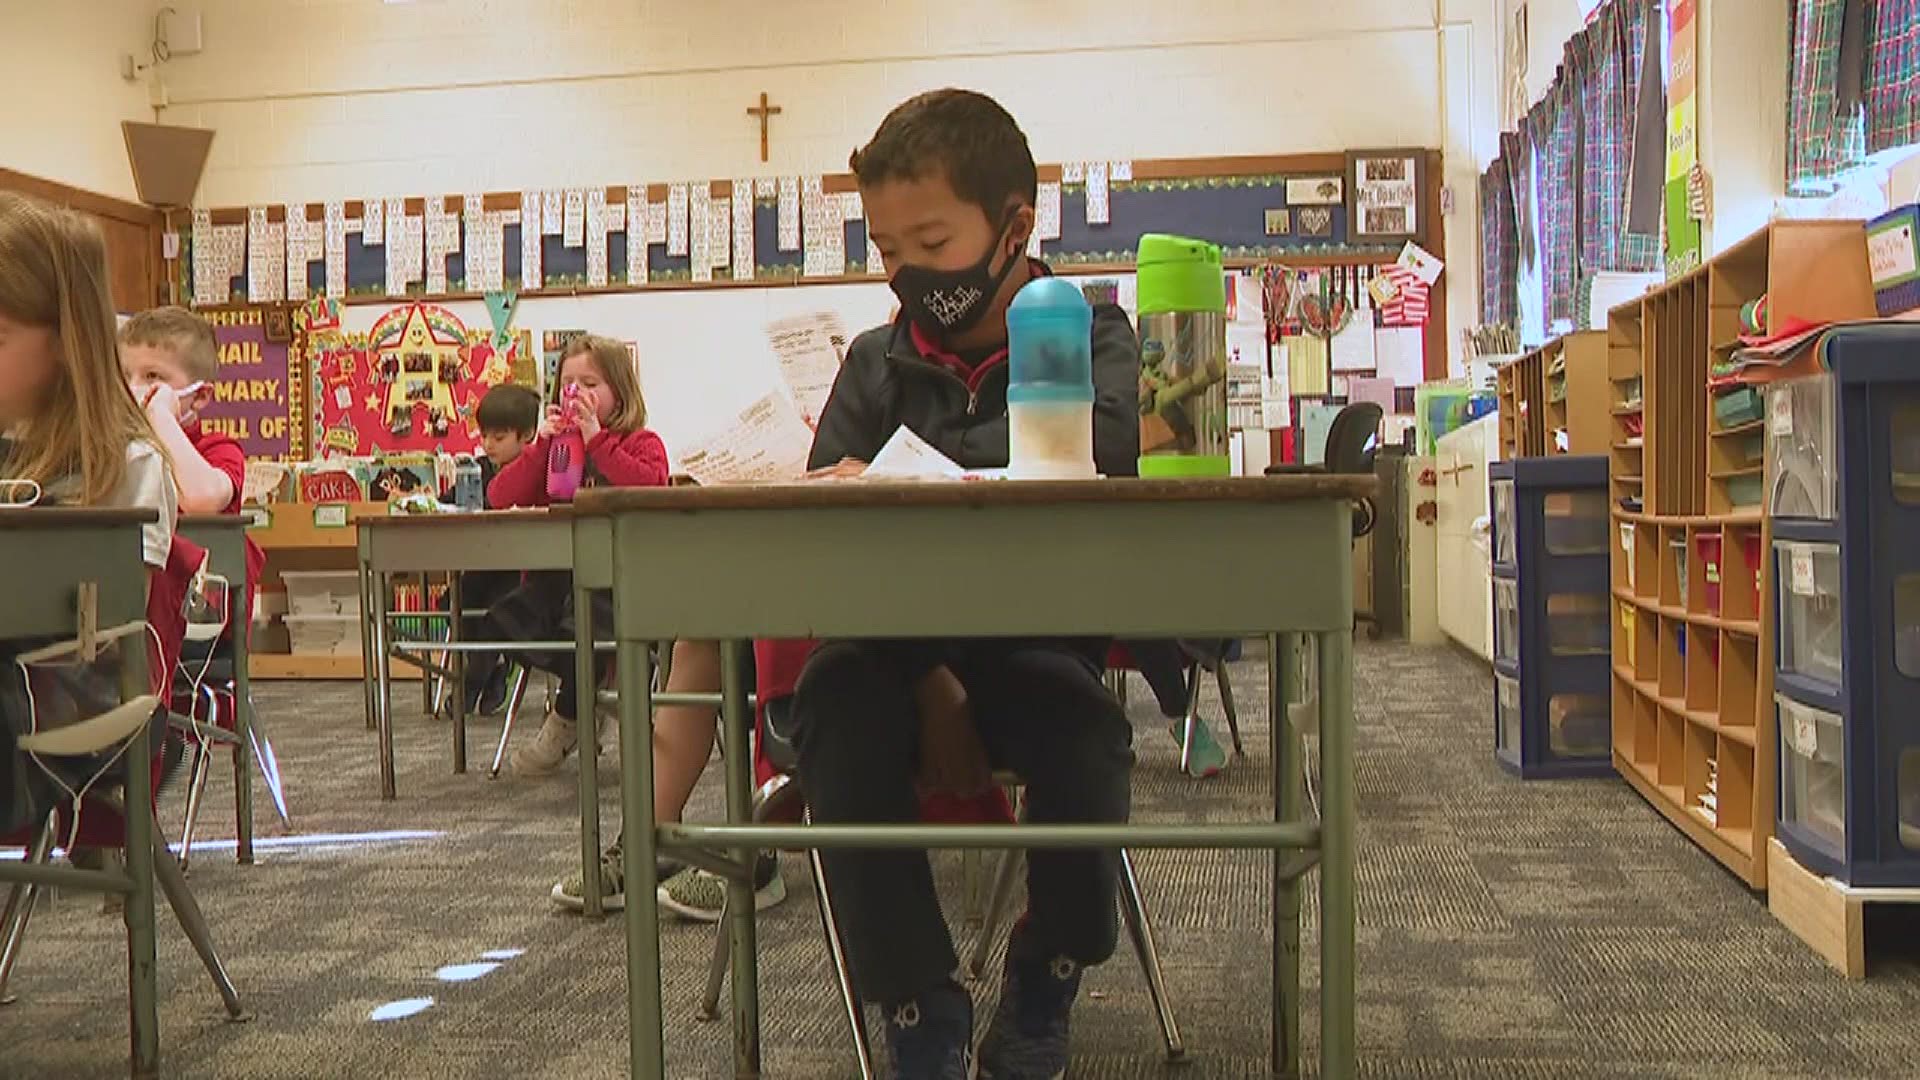 The "school choice bill" would award $5,200 scholarships to students who attend schools that the state says is struggling. Four of those schools are in Davenport.